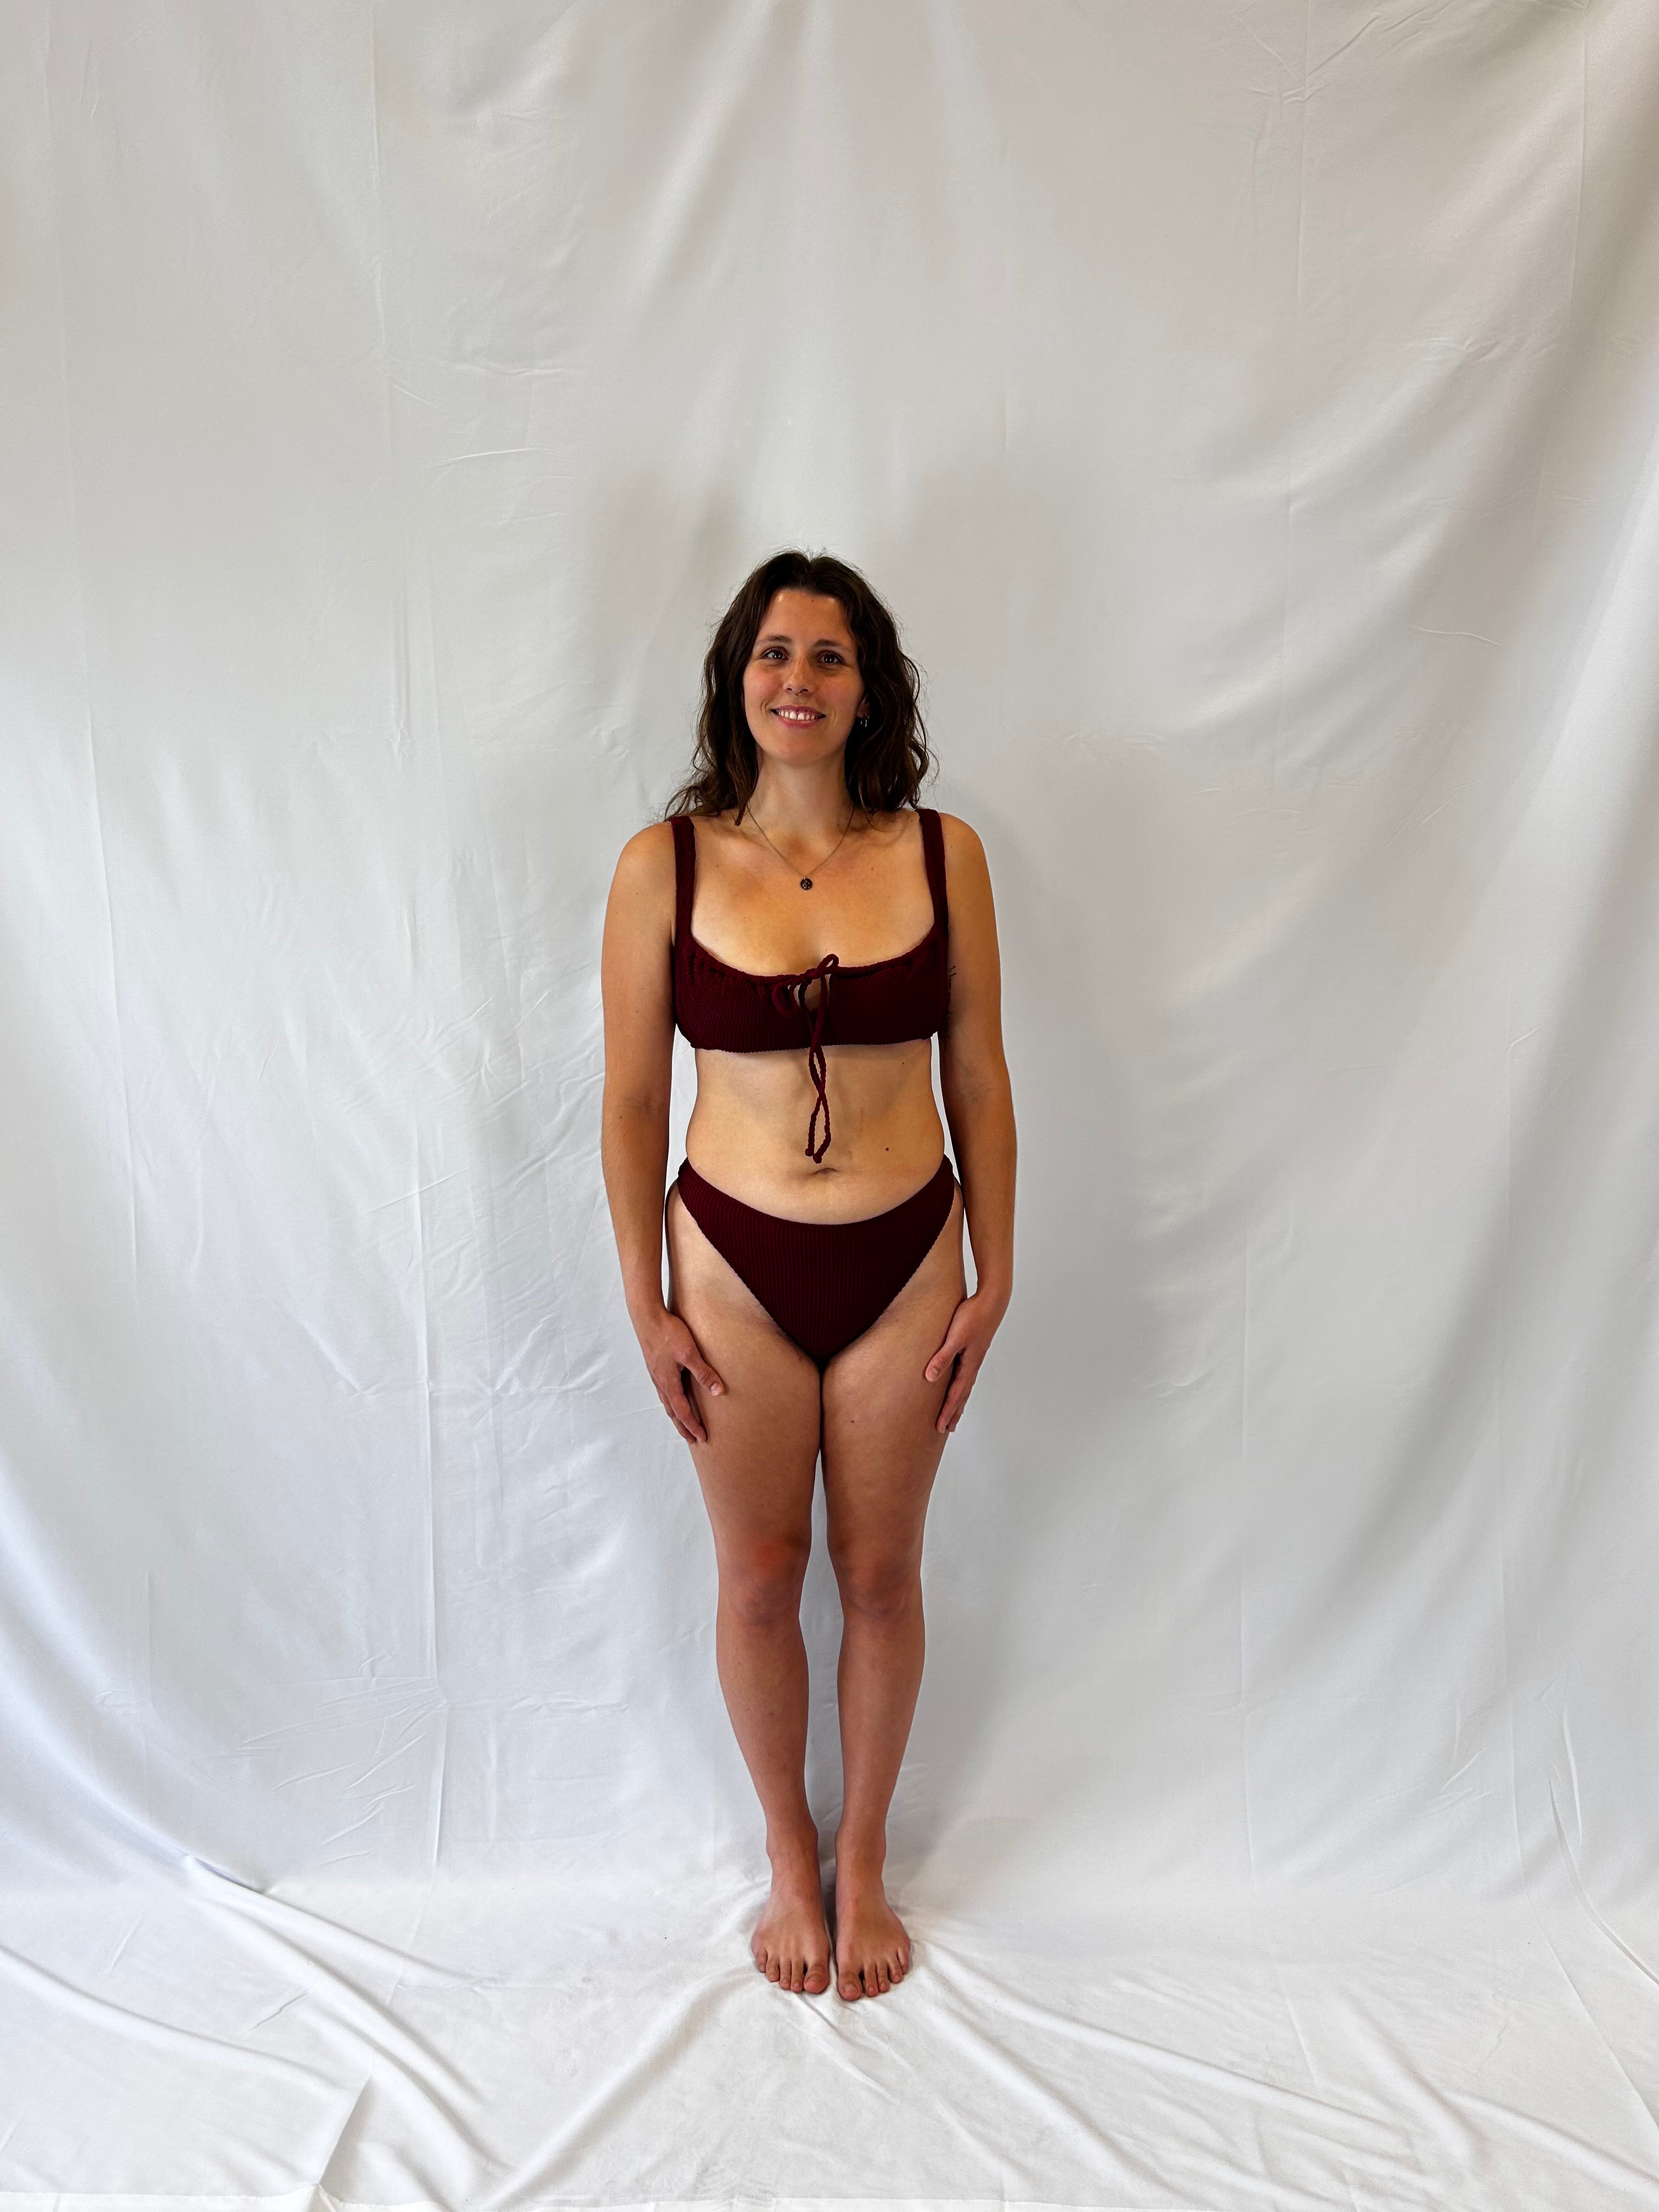 Bikini top is the milkmaid style tie front crinkle fabric. Bikini bottom is the high rise cheeky textured crinkle fabric. Burgundy two piece bikini from the front.